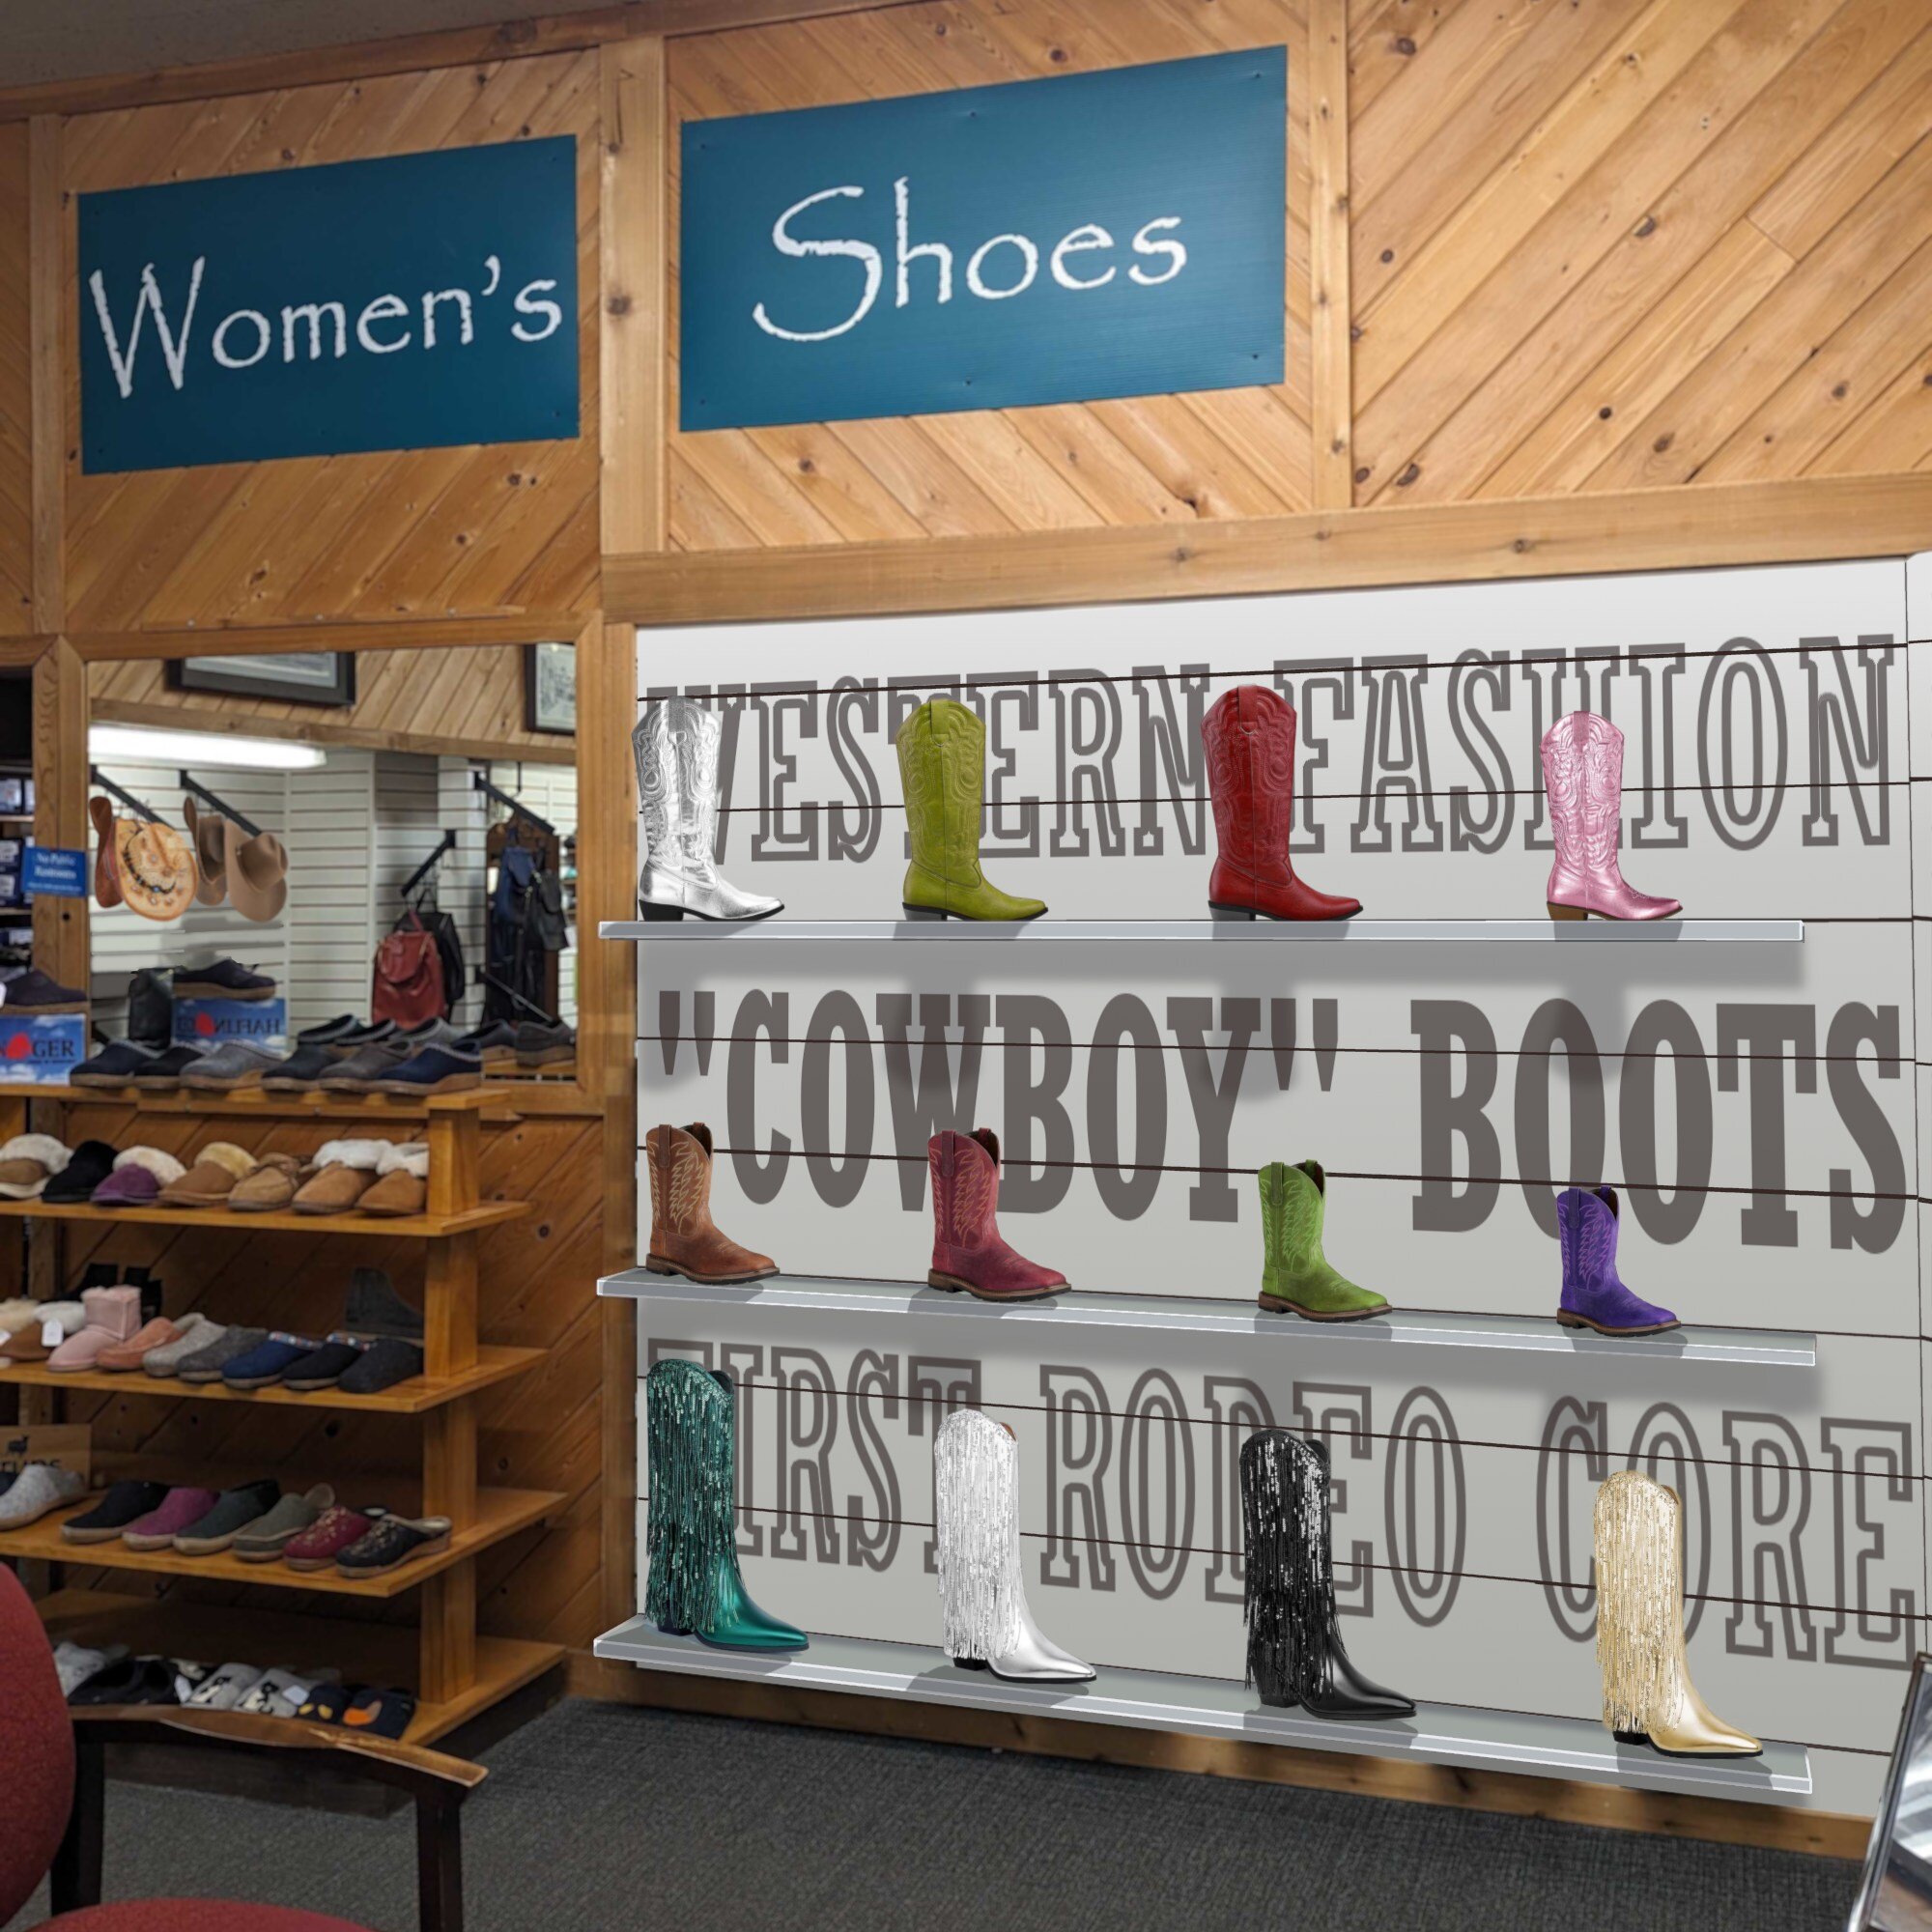 ✨ Hide &amp; Sole is entering the Western Boot game!! ✨
Early this morning, we unveiled our big and bold new direction to an eager crowd in downtown Missoula. We are moving into the Western Wear market with our new line of colorful and bedazzled boot